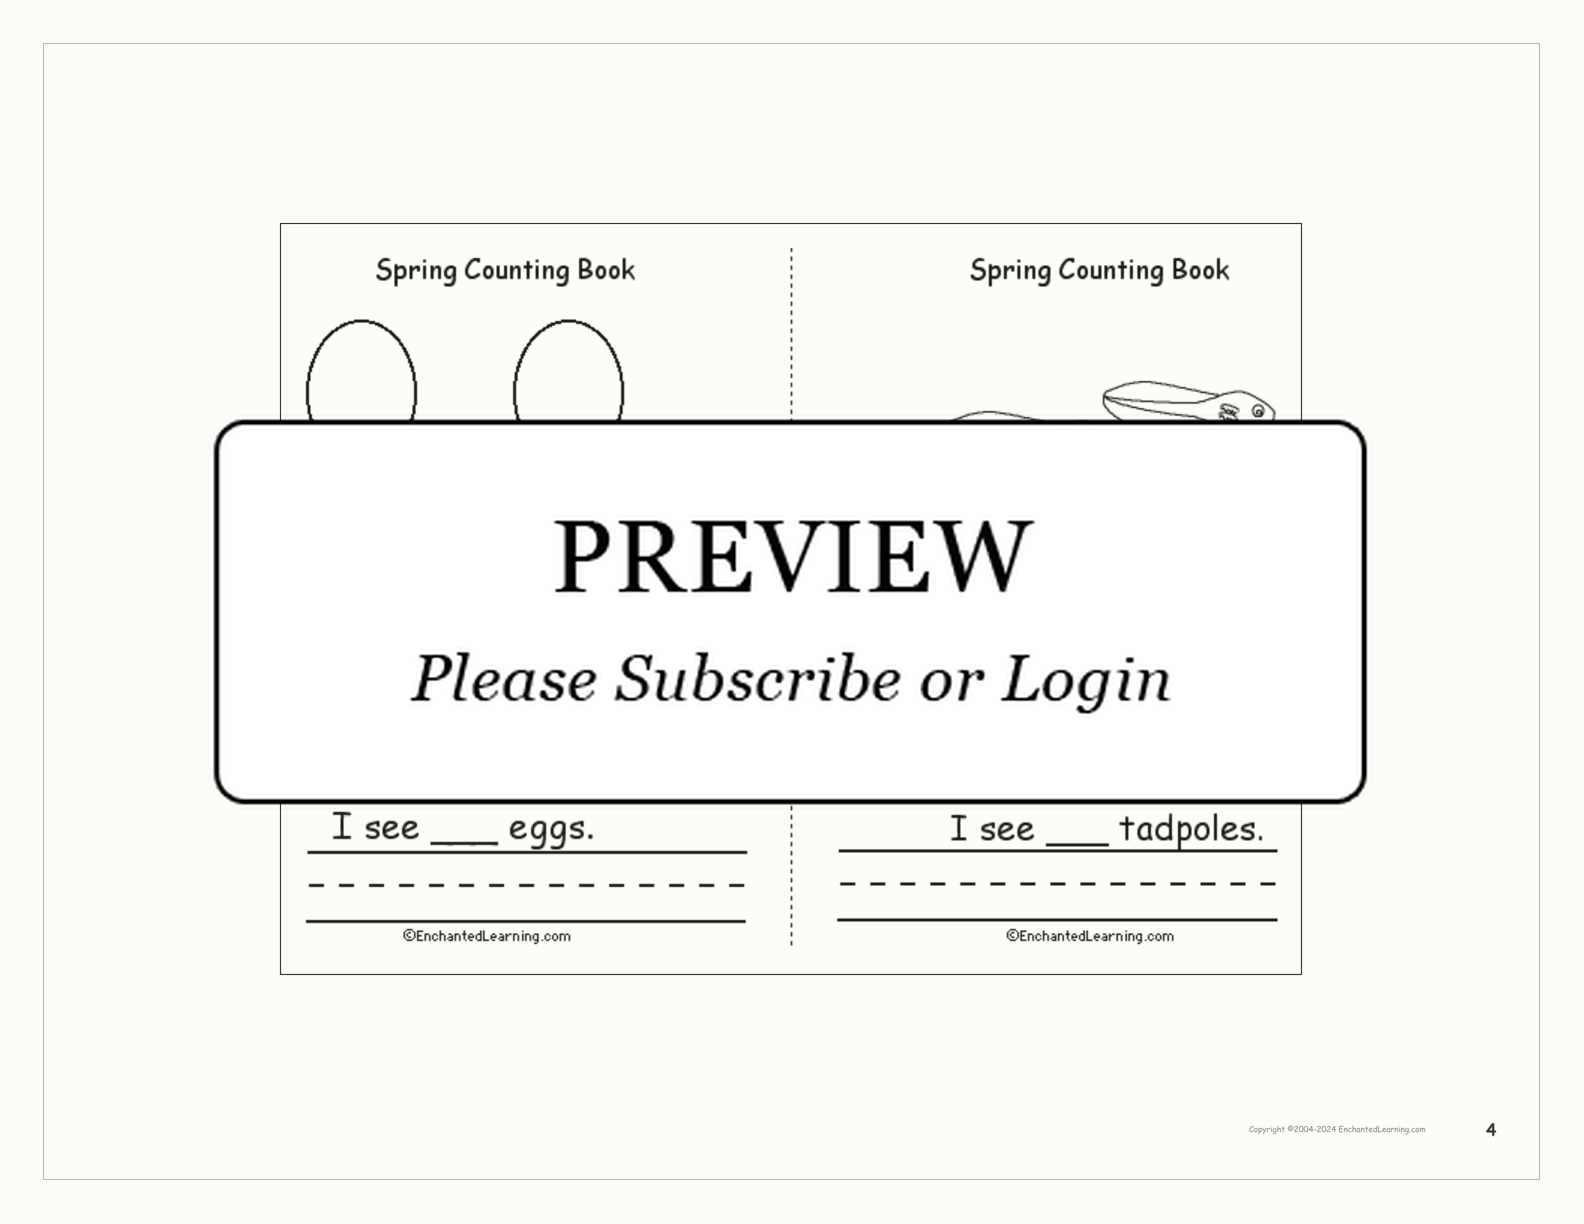 Spring Counting Book interactive worksheet page 4